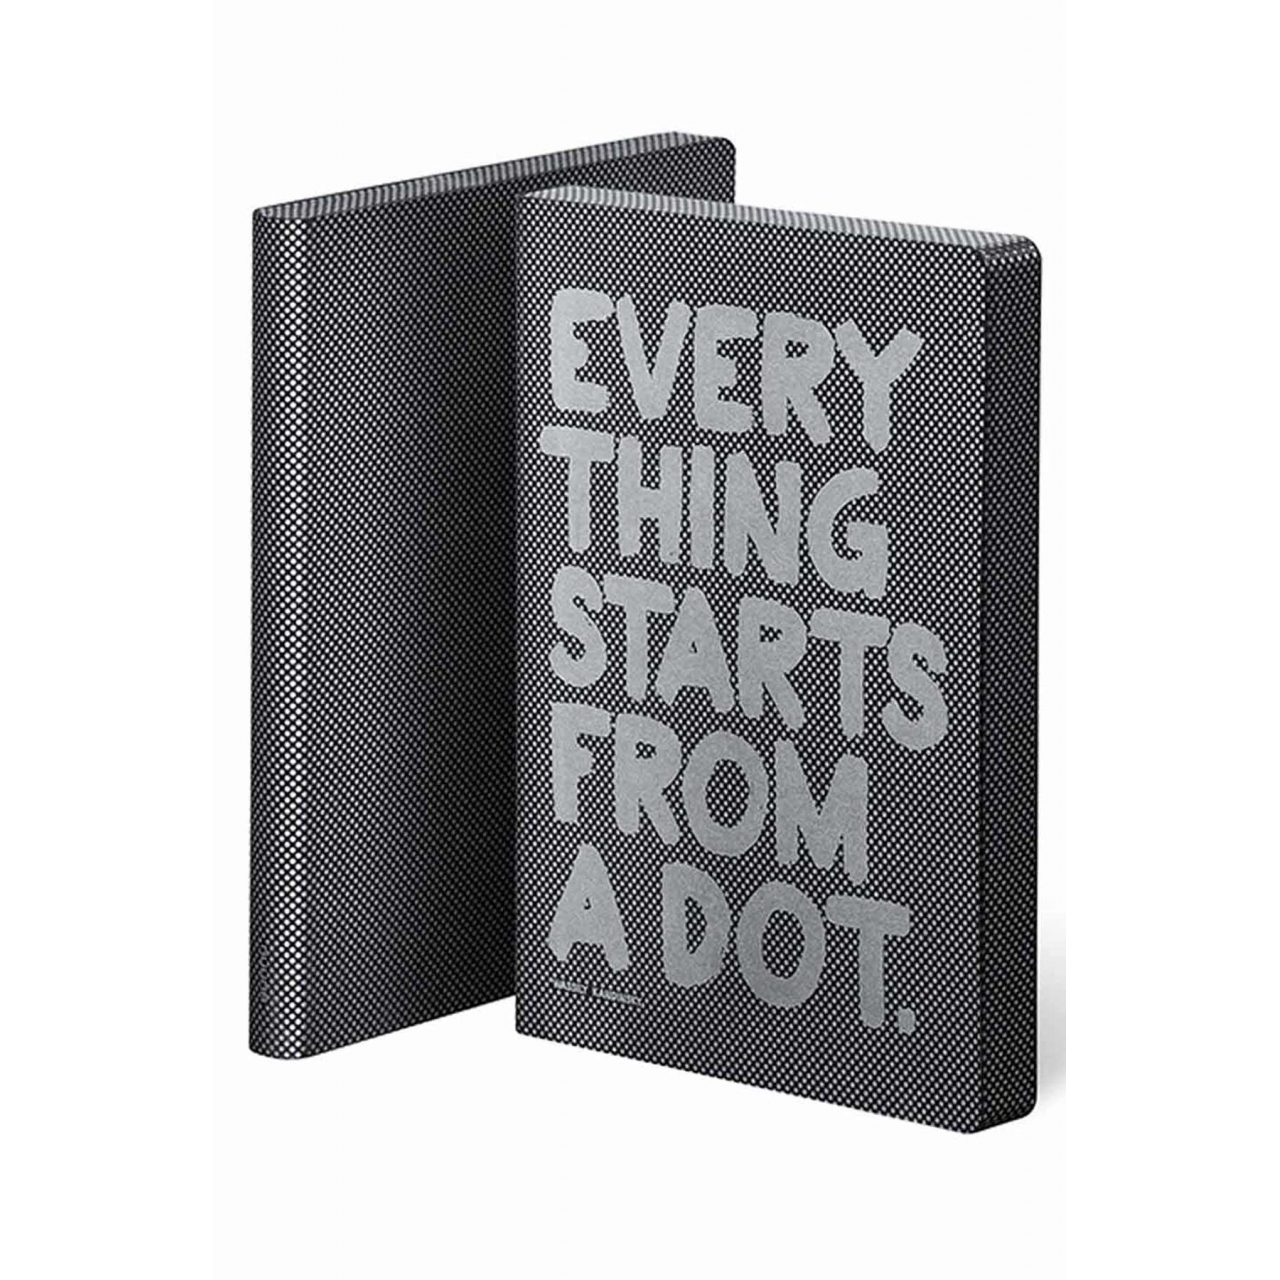 nuuna L - EVERYTHING STARTS FROM A DOT